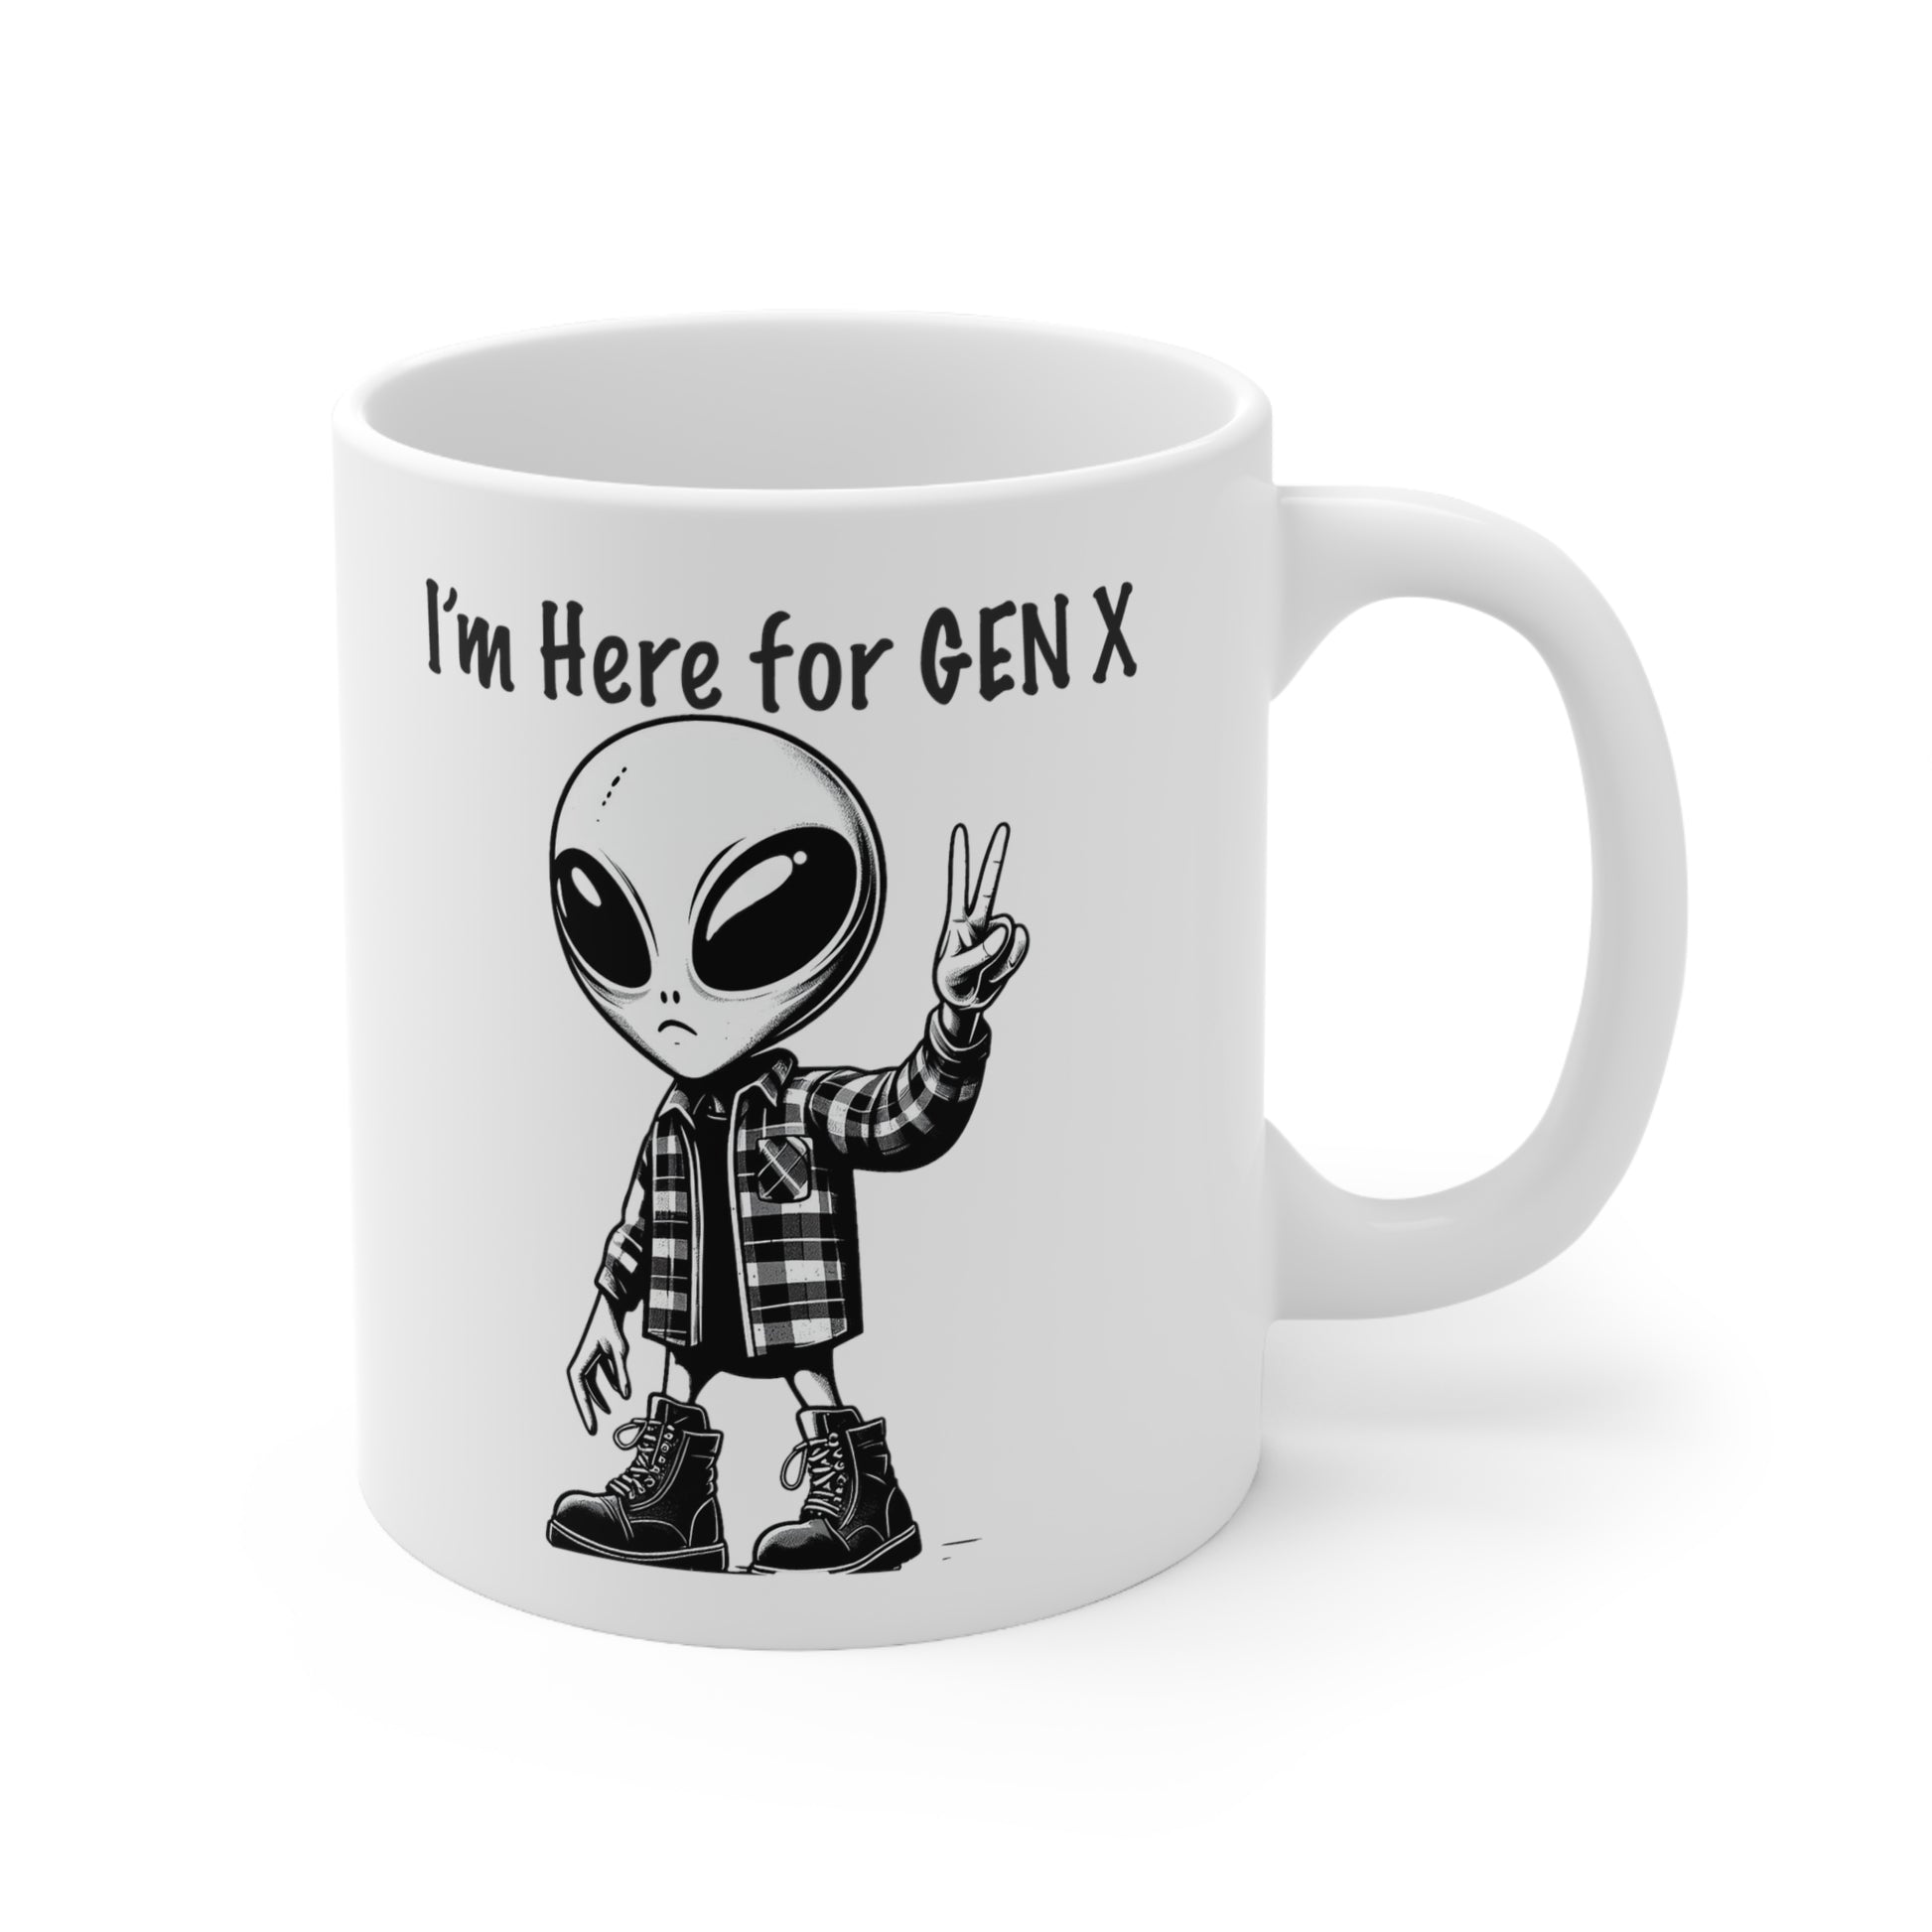  this mug that features an alien with combat boots and a flannel shirt, flashing a peace sign, saying “I’m here for Gen X”.